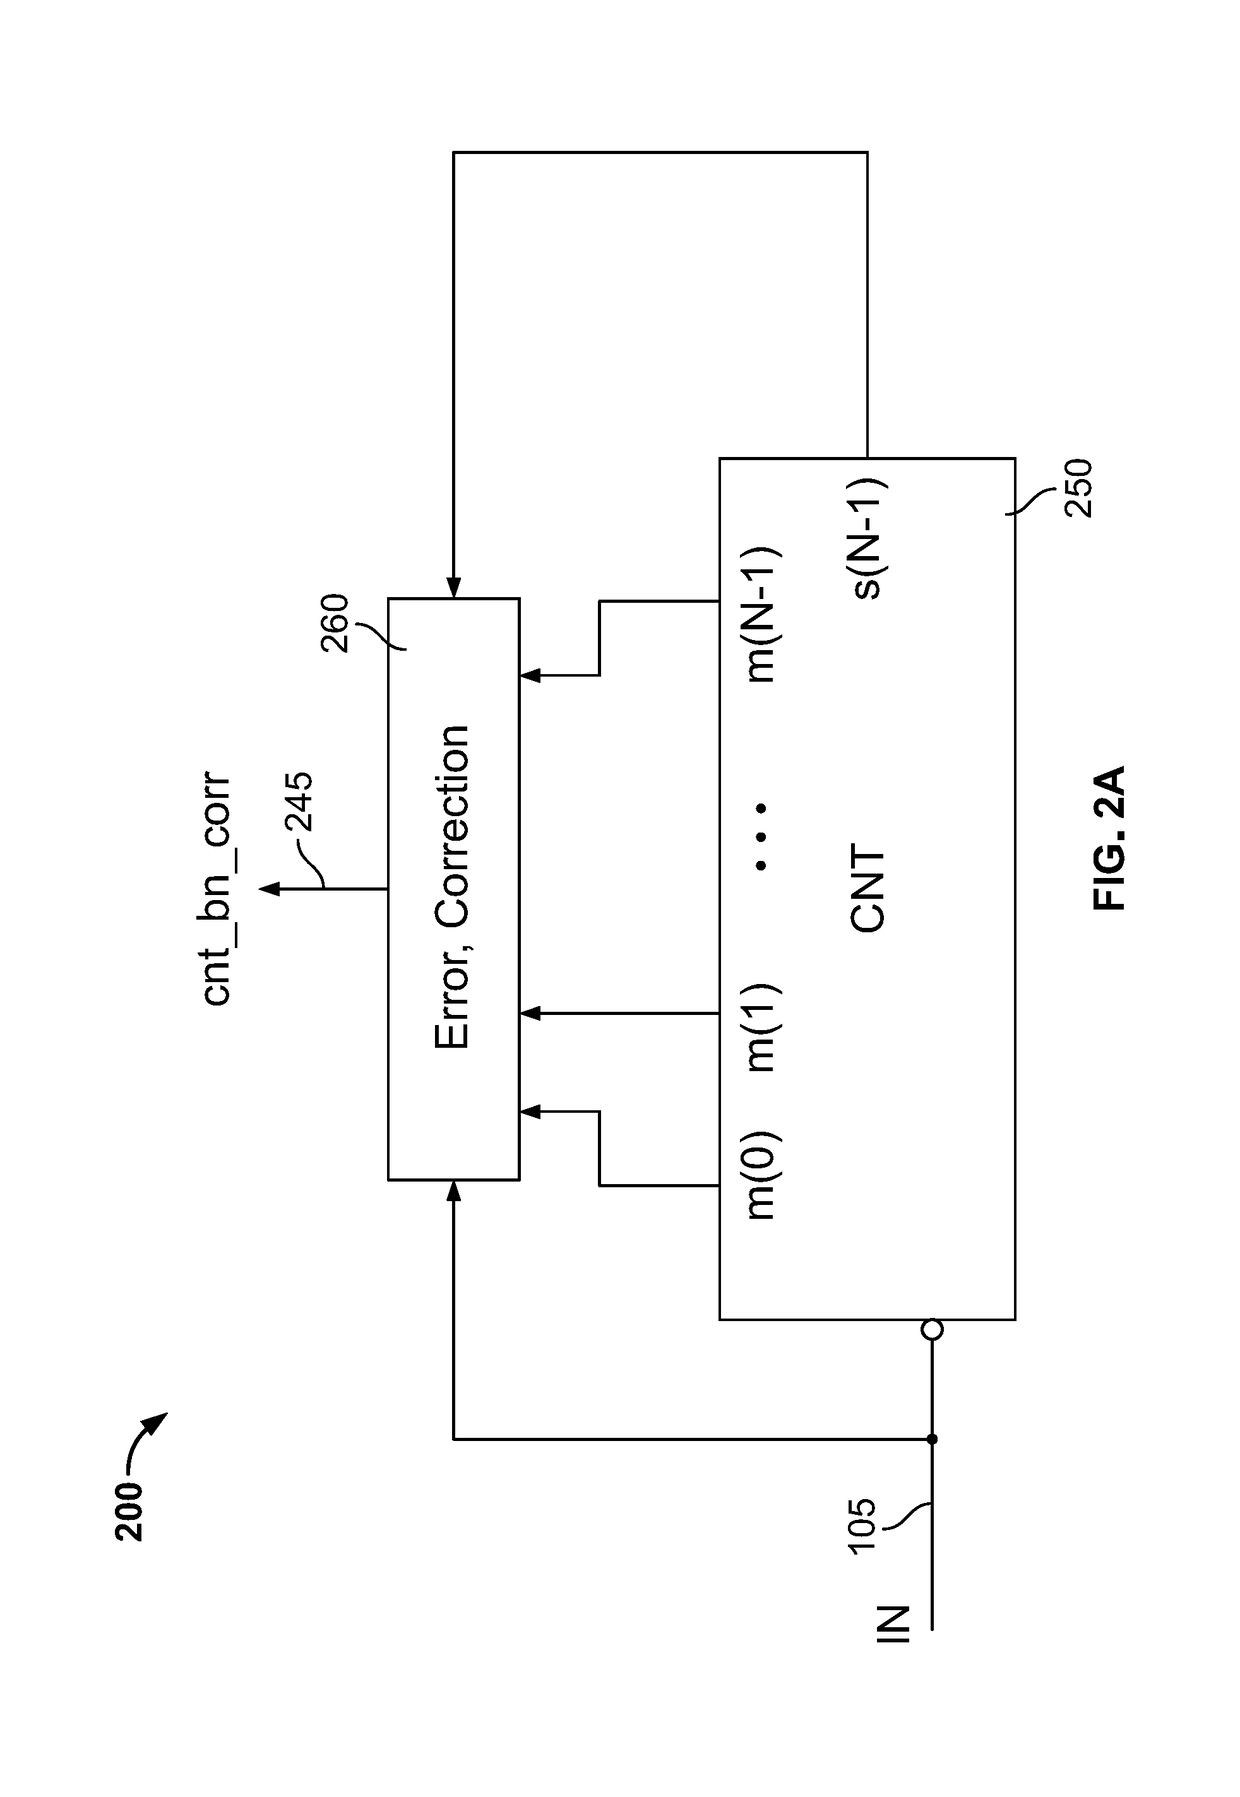 Systems and methods for gray coding based error correction in an asynchronous counter